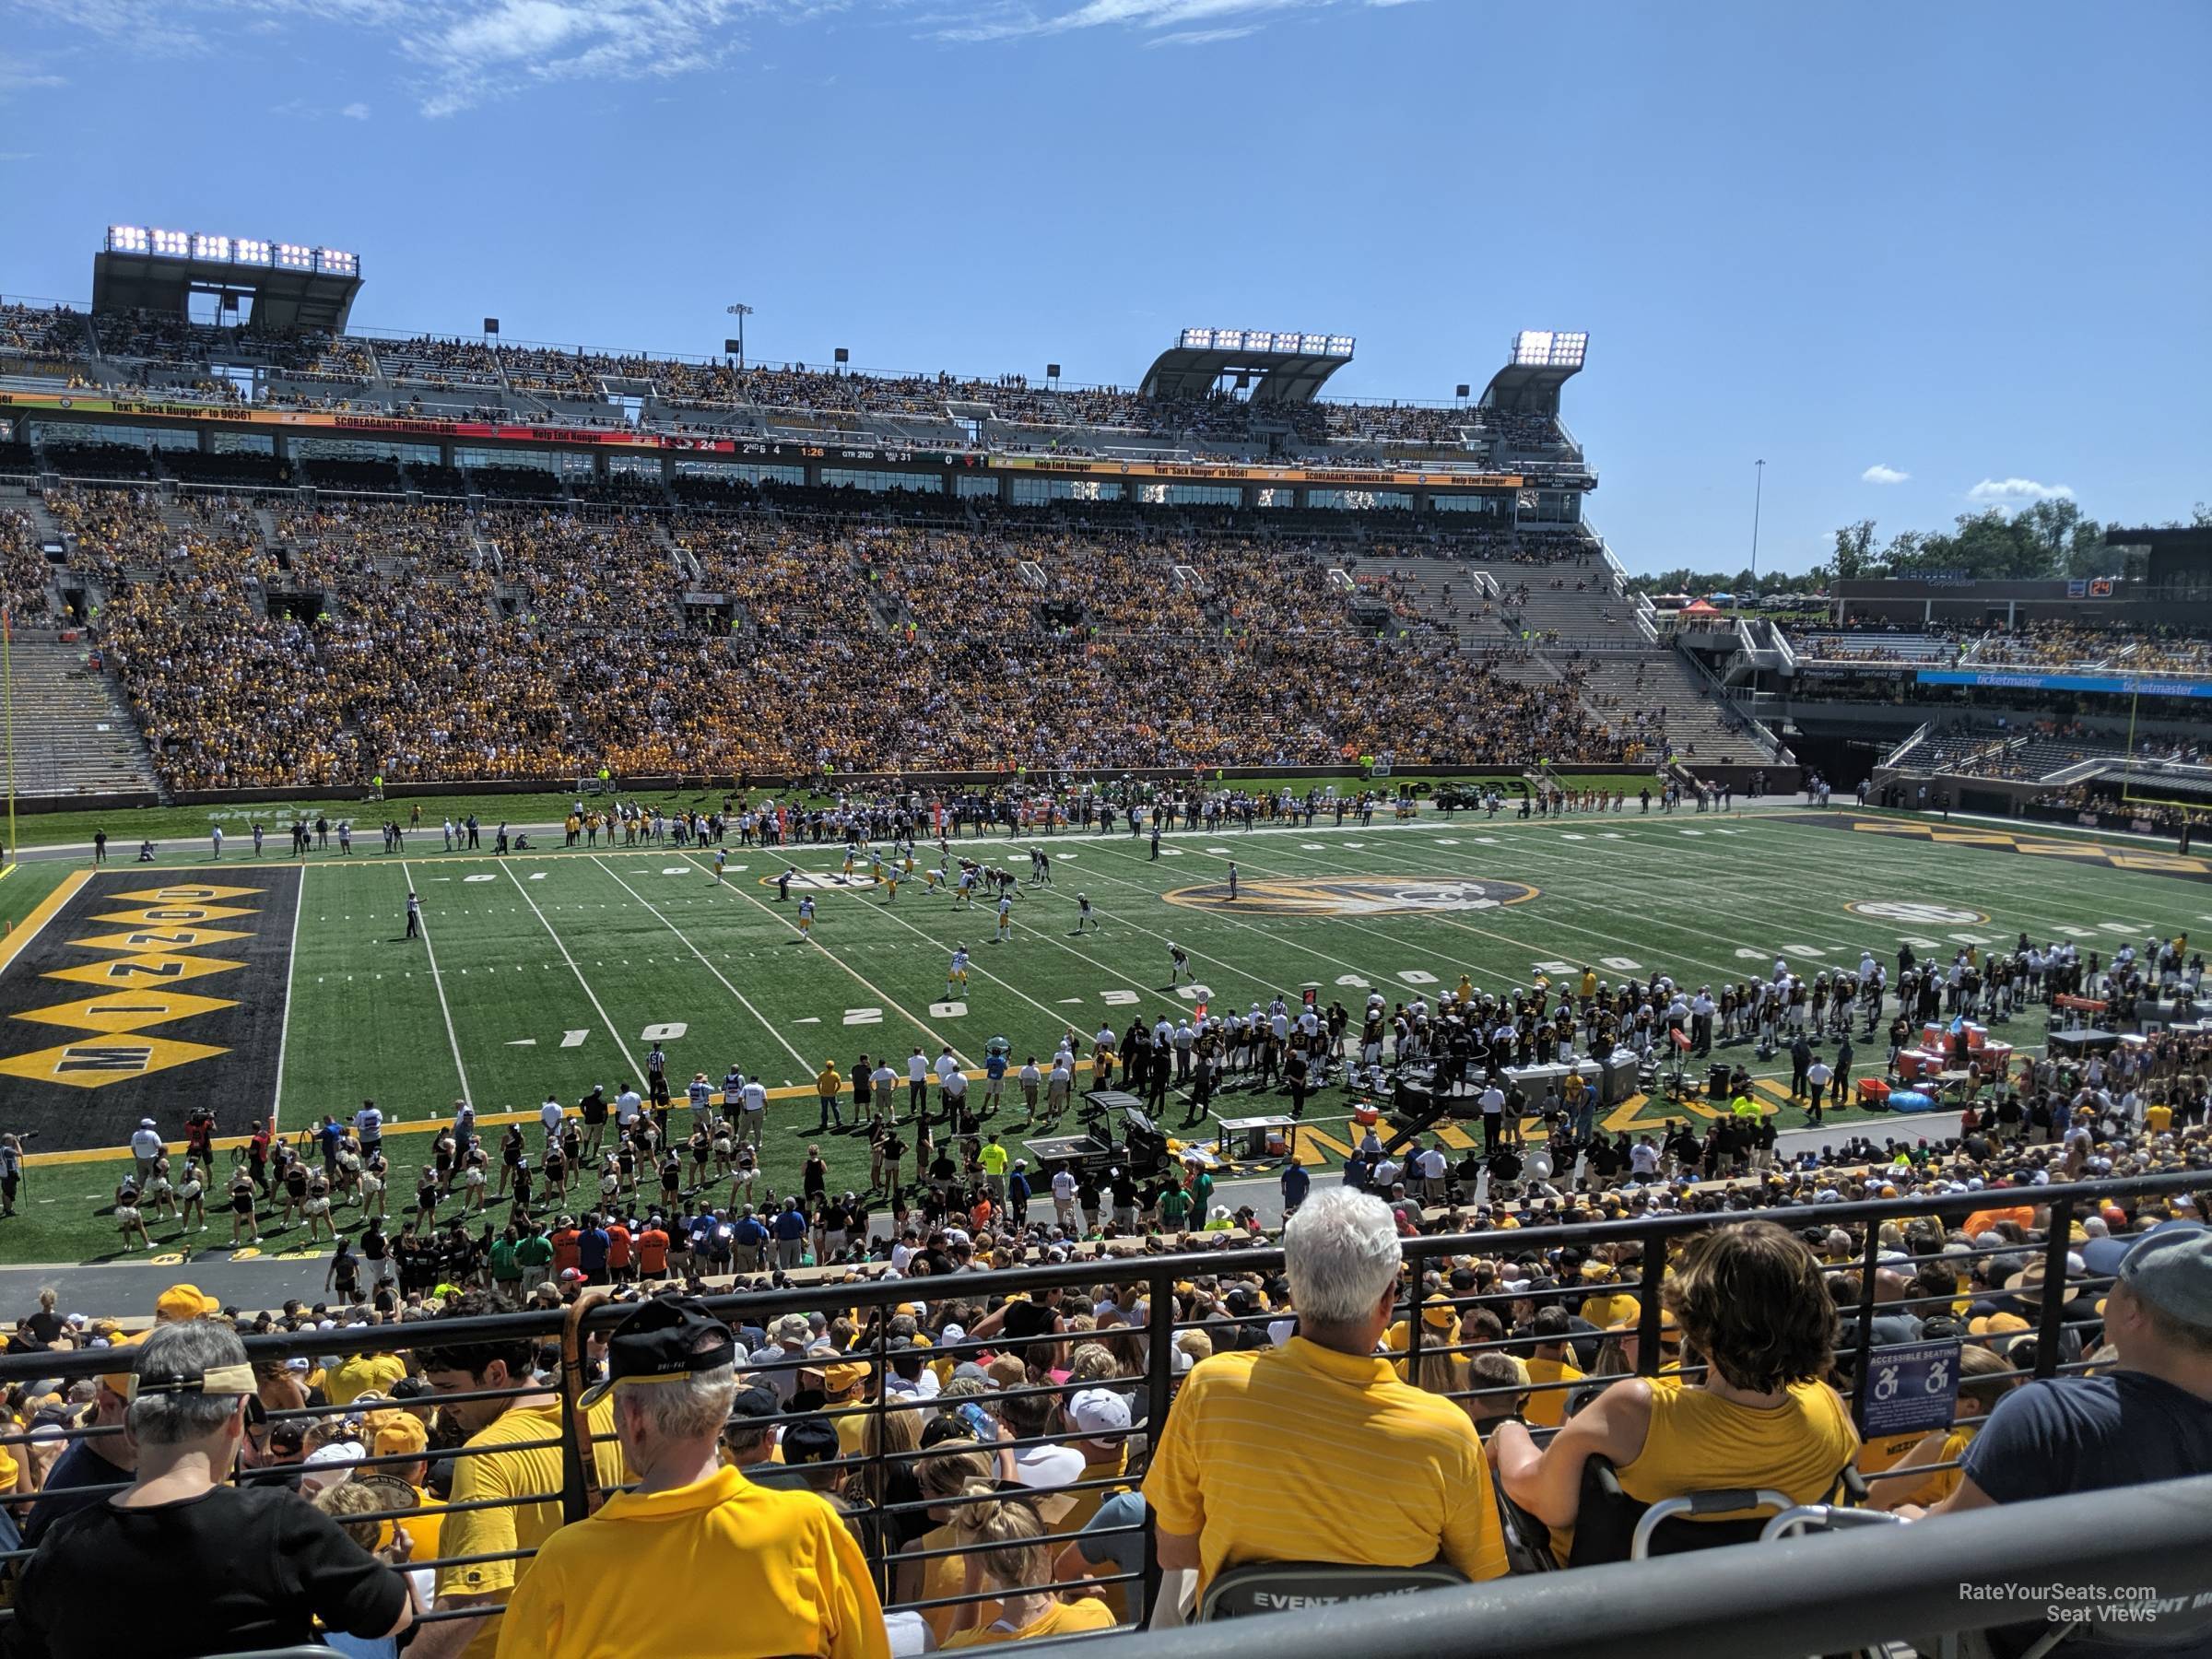 section 118, row 38 seat view  - faurot field